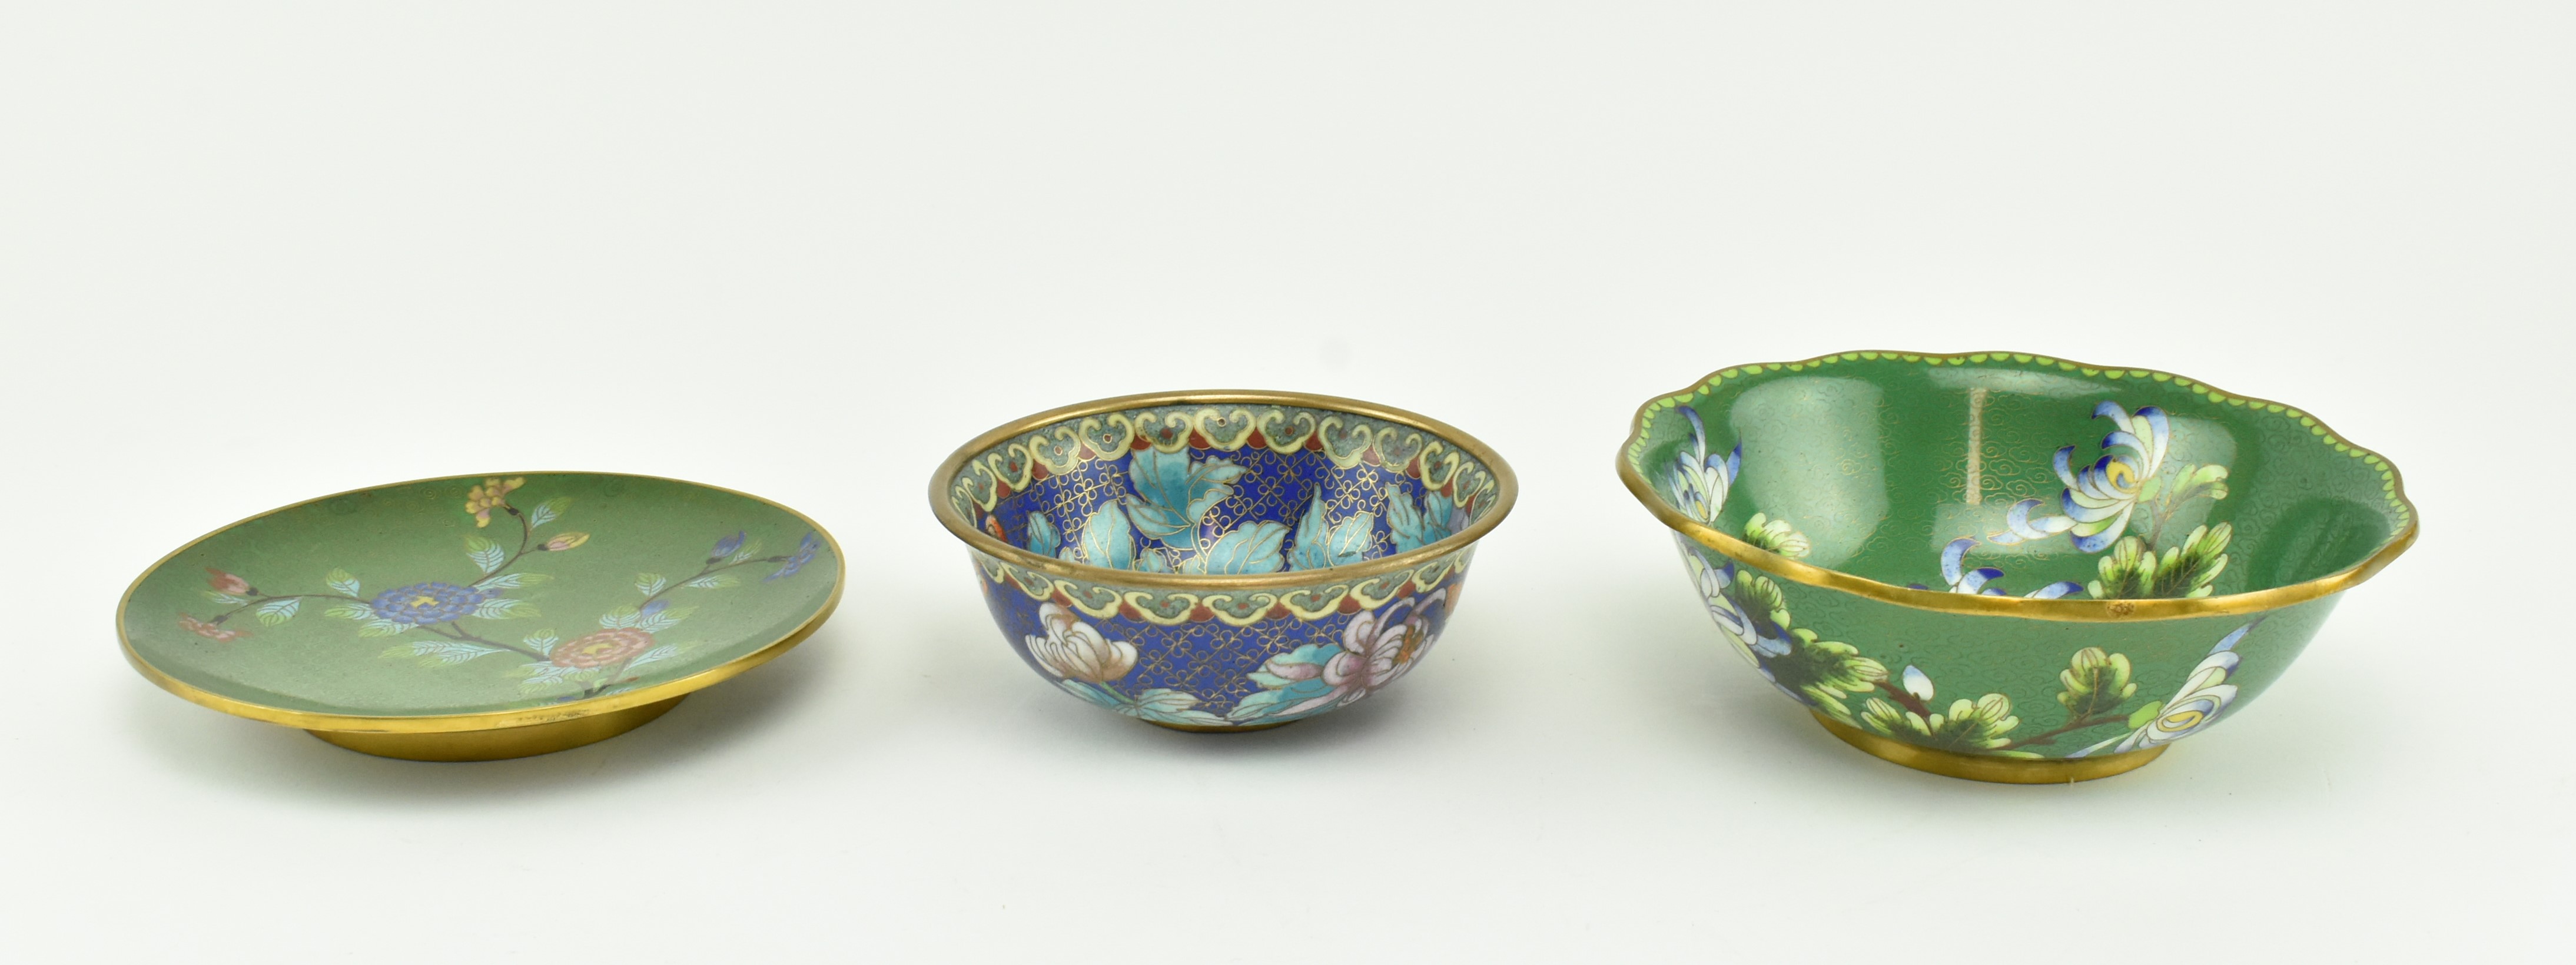 TWO 20TH CENTURY CHINESE CLOISONNE FLORAL BOWLS & A PLATE